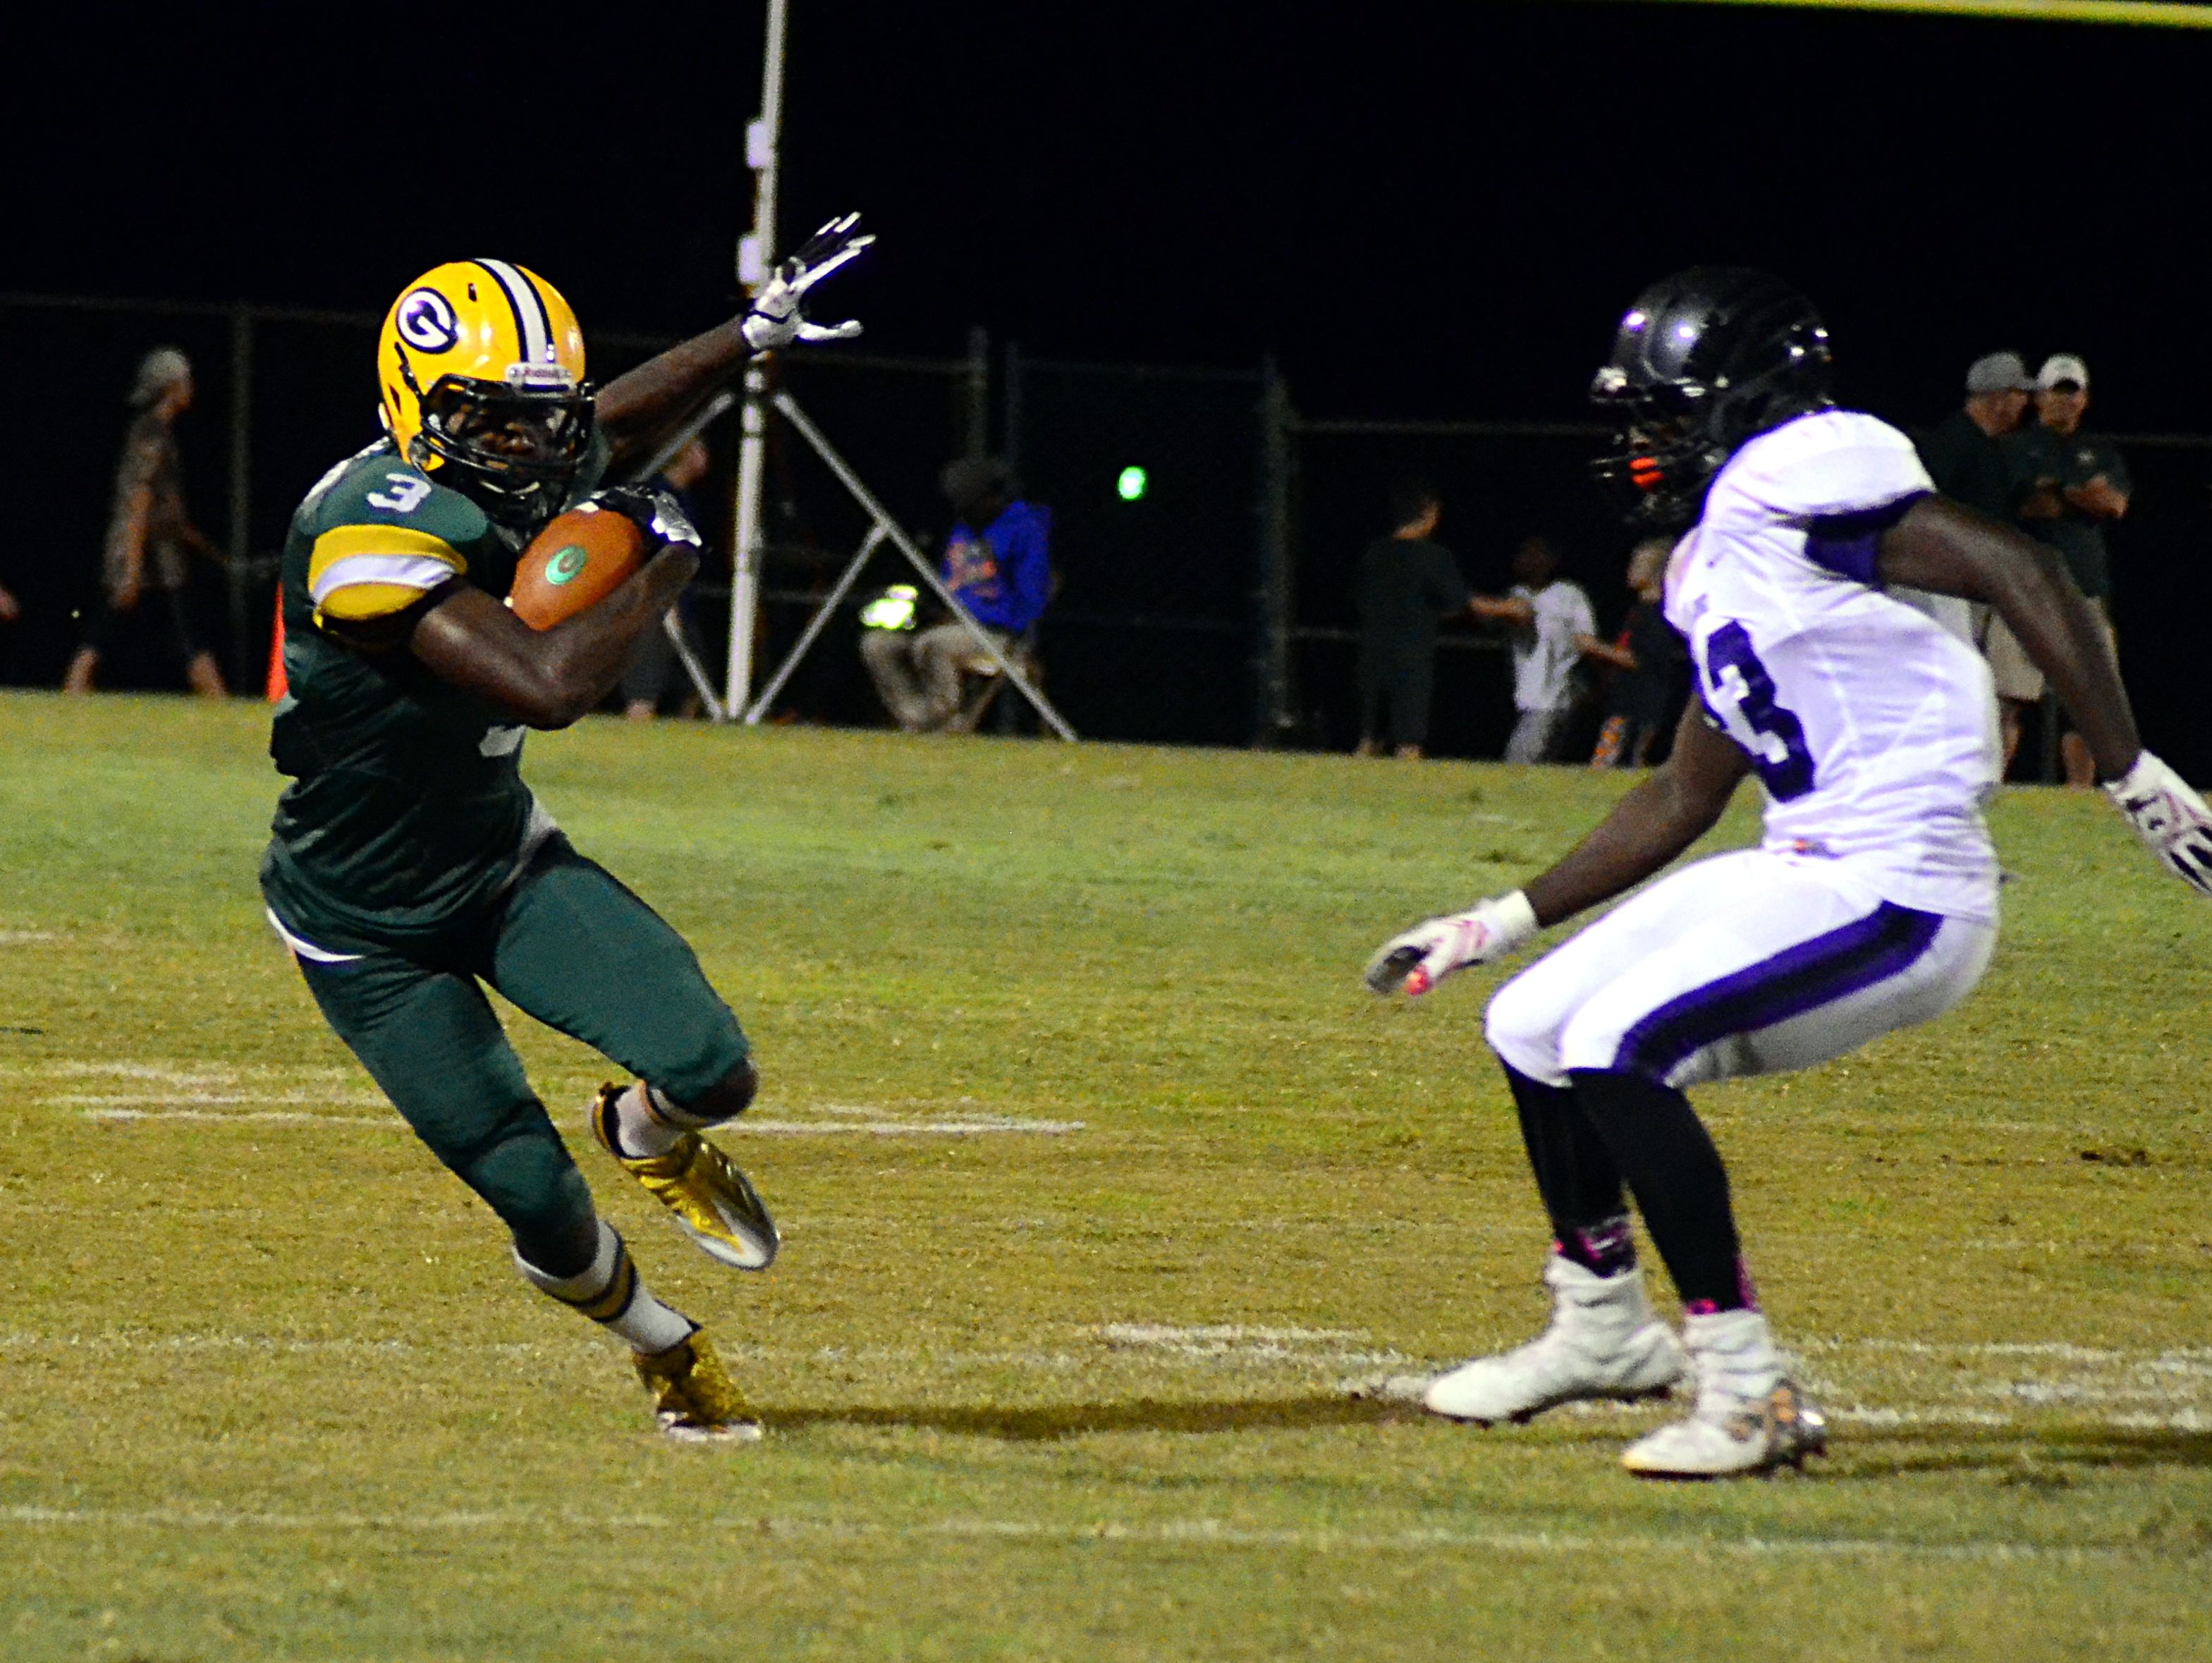 Gallatin High senior Marcus DeVault cuts away from a Cane Ridge defender during first-quarter action.